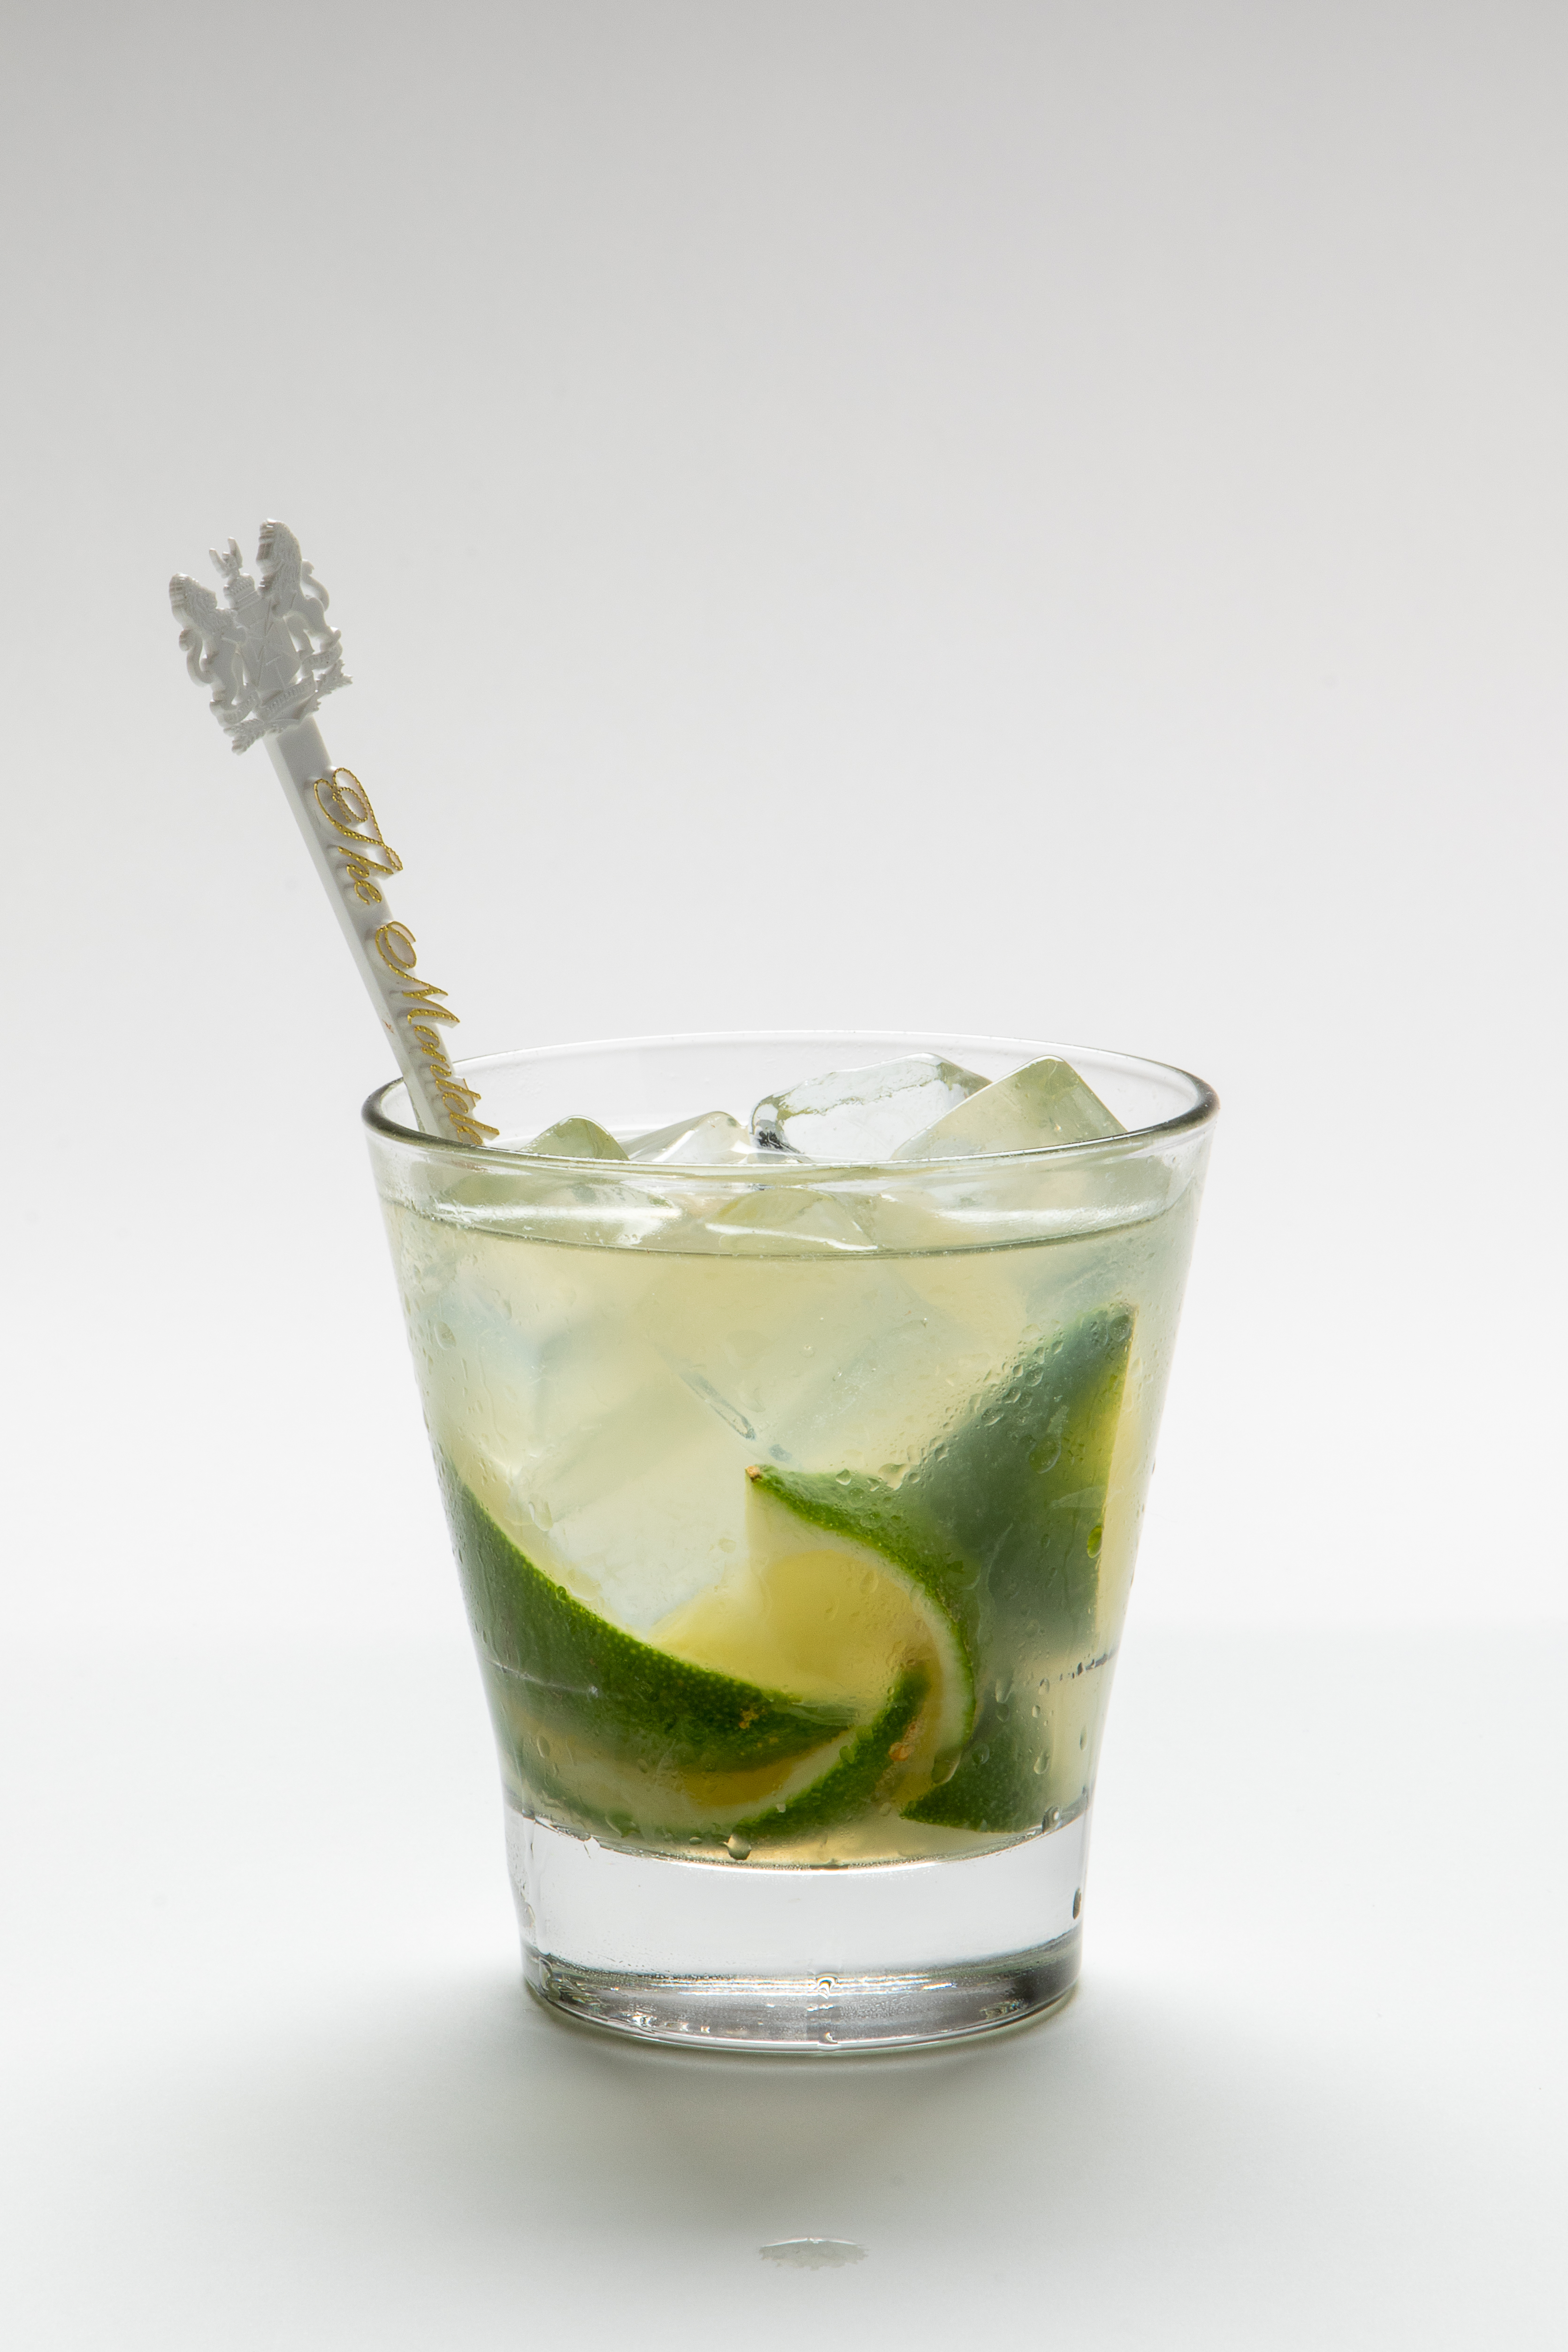 Almost unknown outside of Brazil until recent years, the Caipirihania has now become popular worldwide. The name of this muddled-lime delight translates to “little countryside drink,” but it feels right at home in the Big Easy.